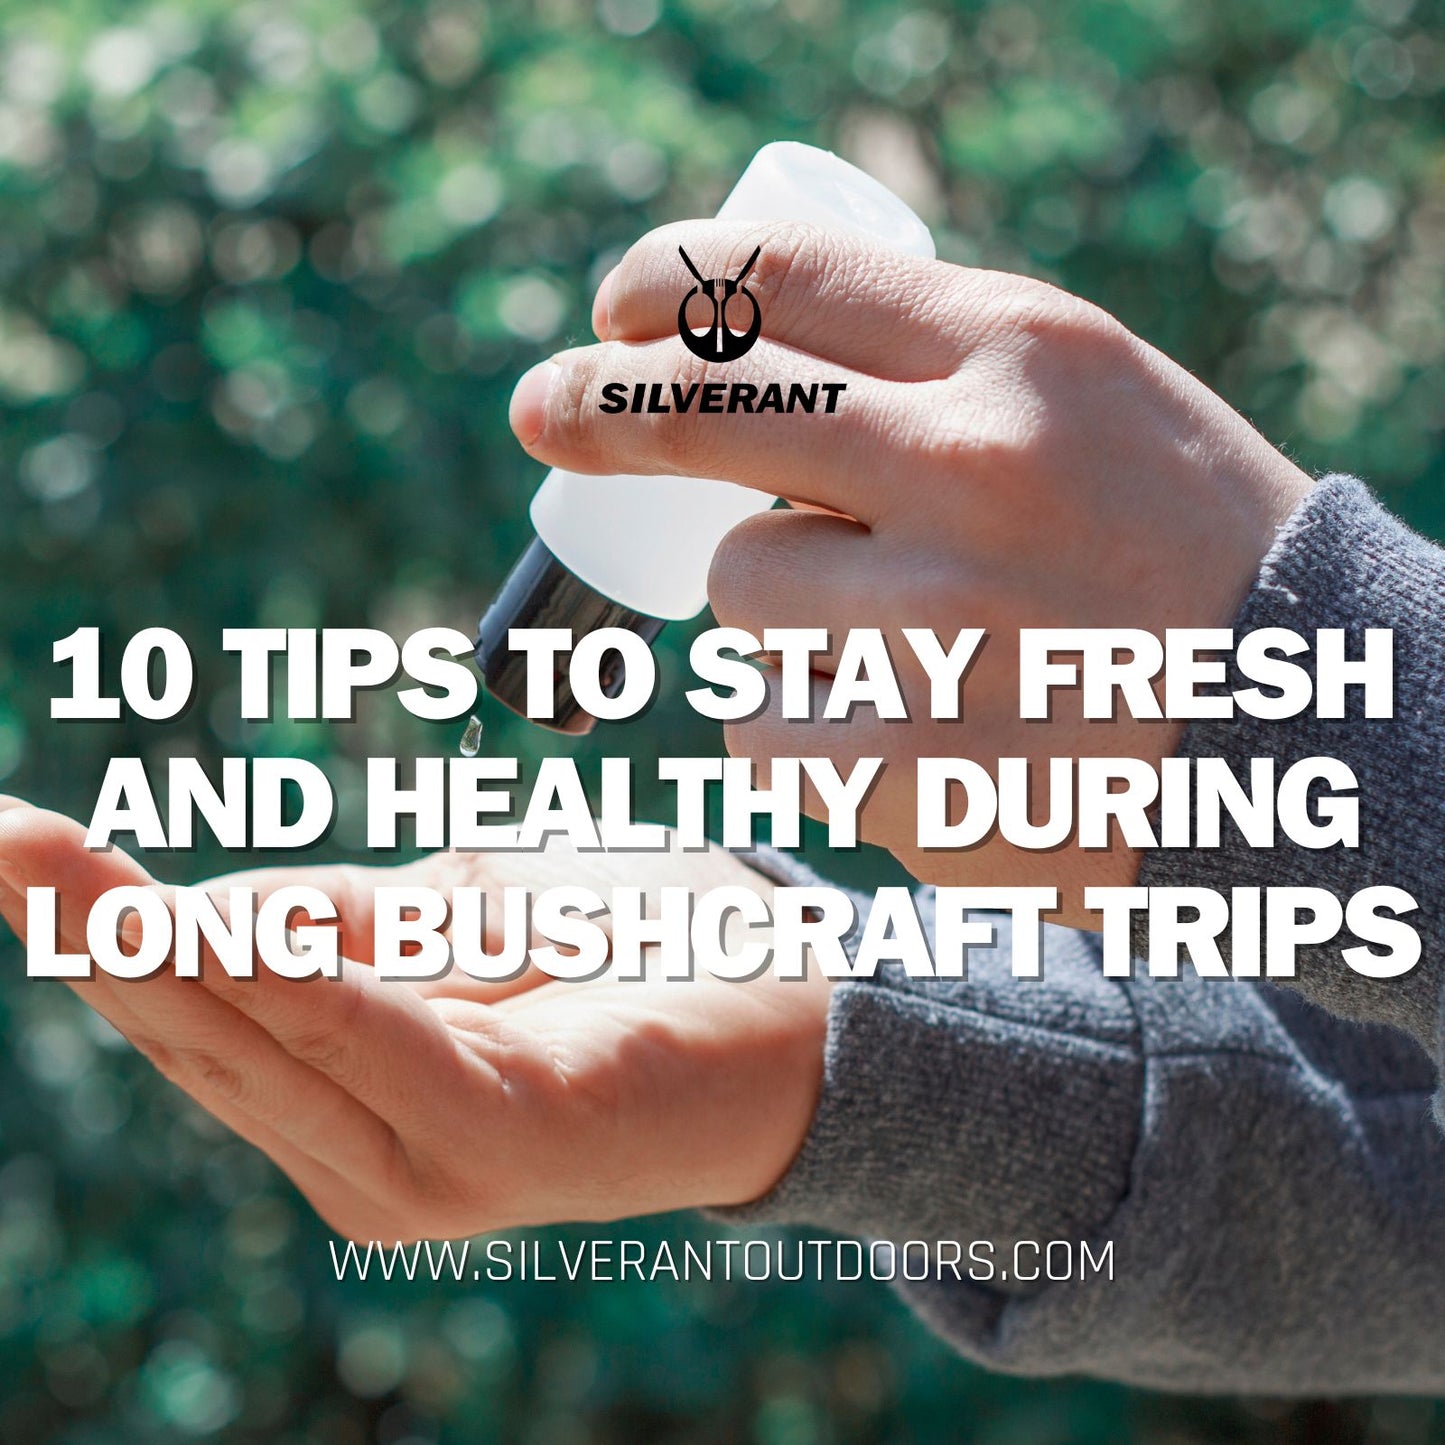 10 Tips to Stay Fresh and Healthy During Long Bushcraft Trips - silverant outdoors